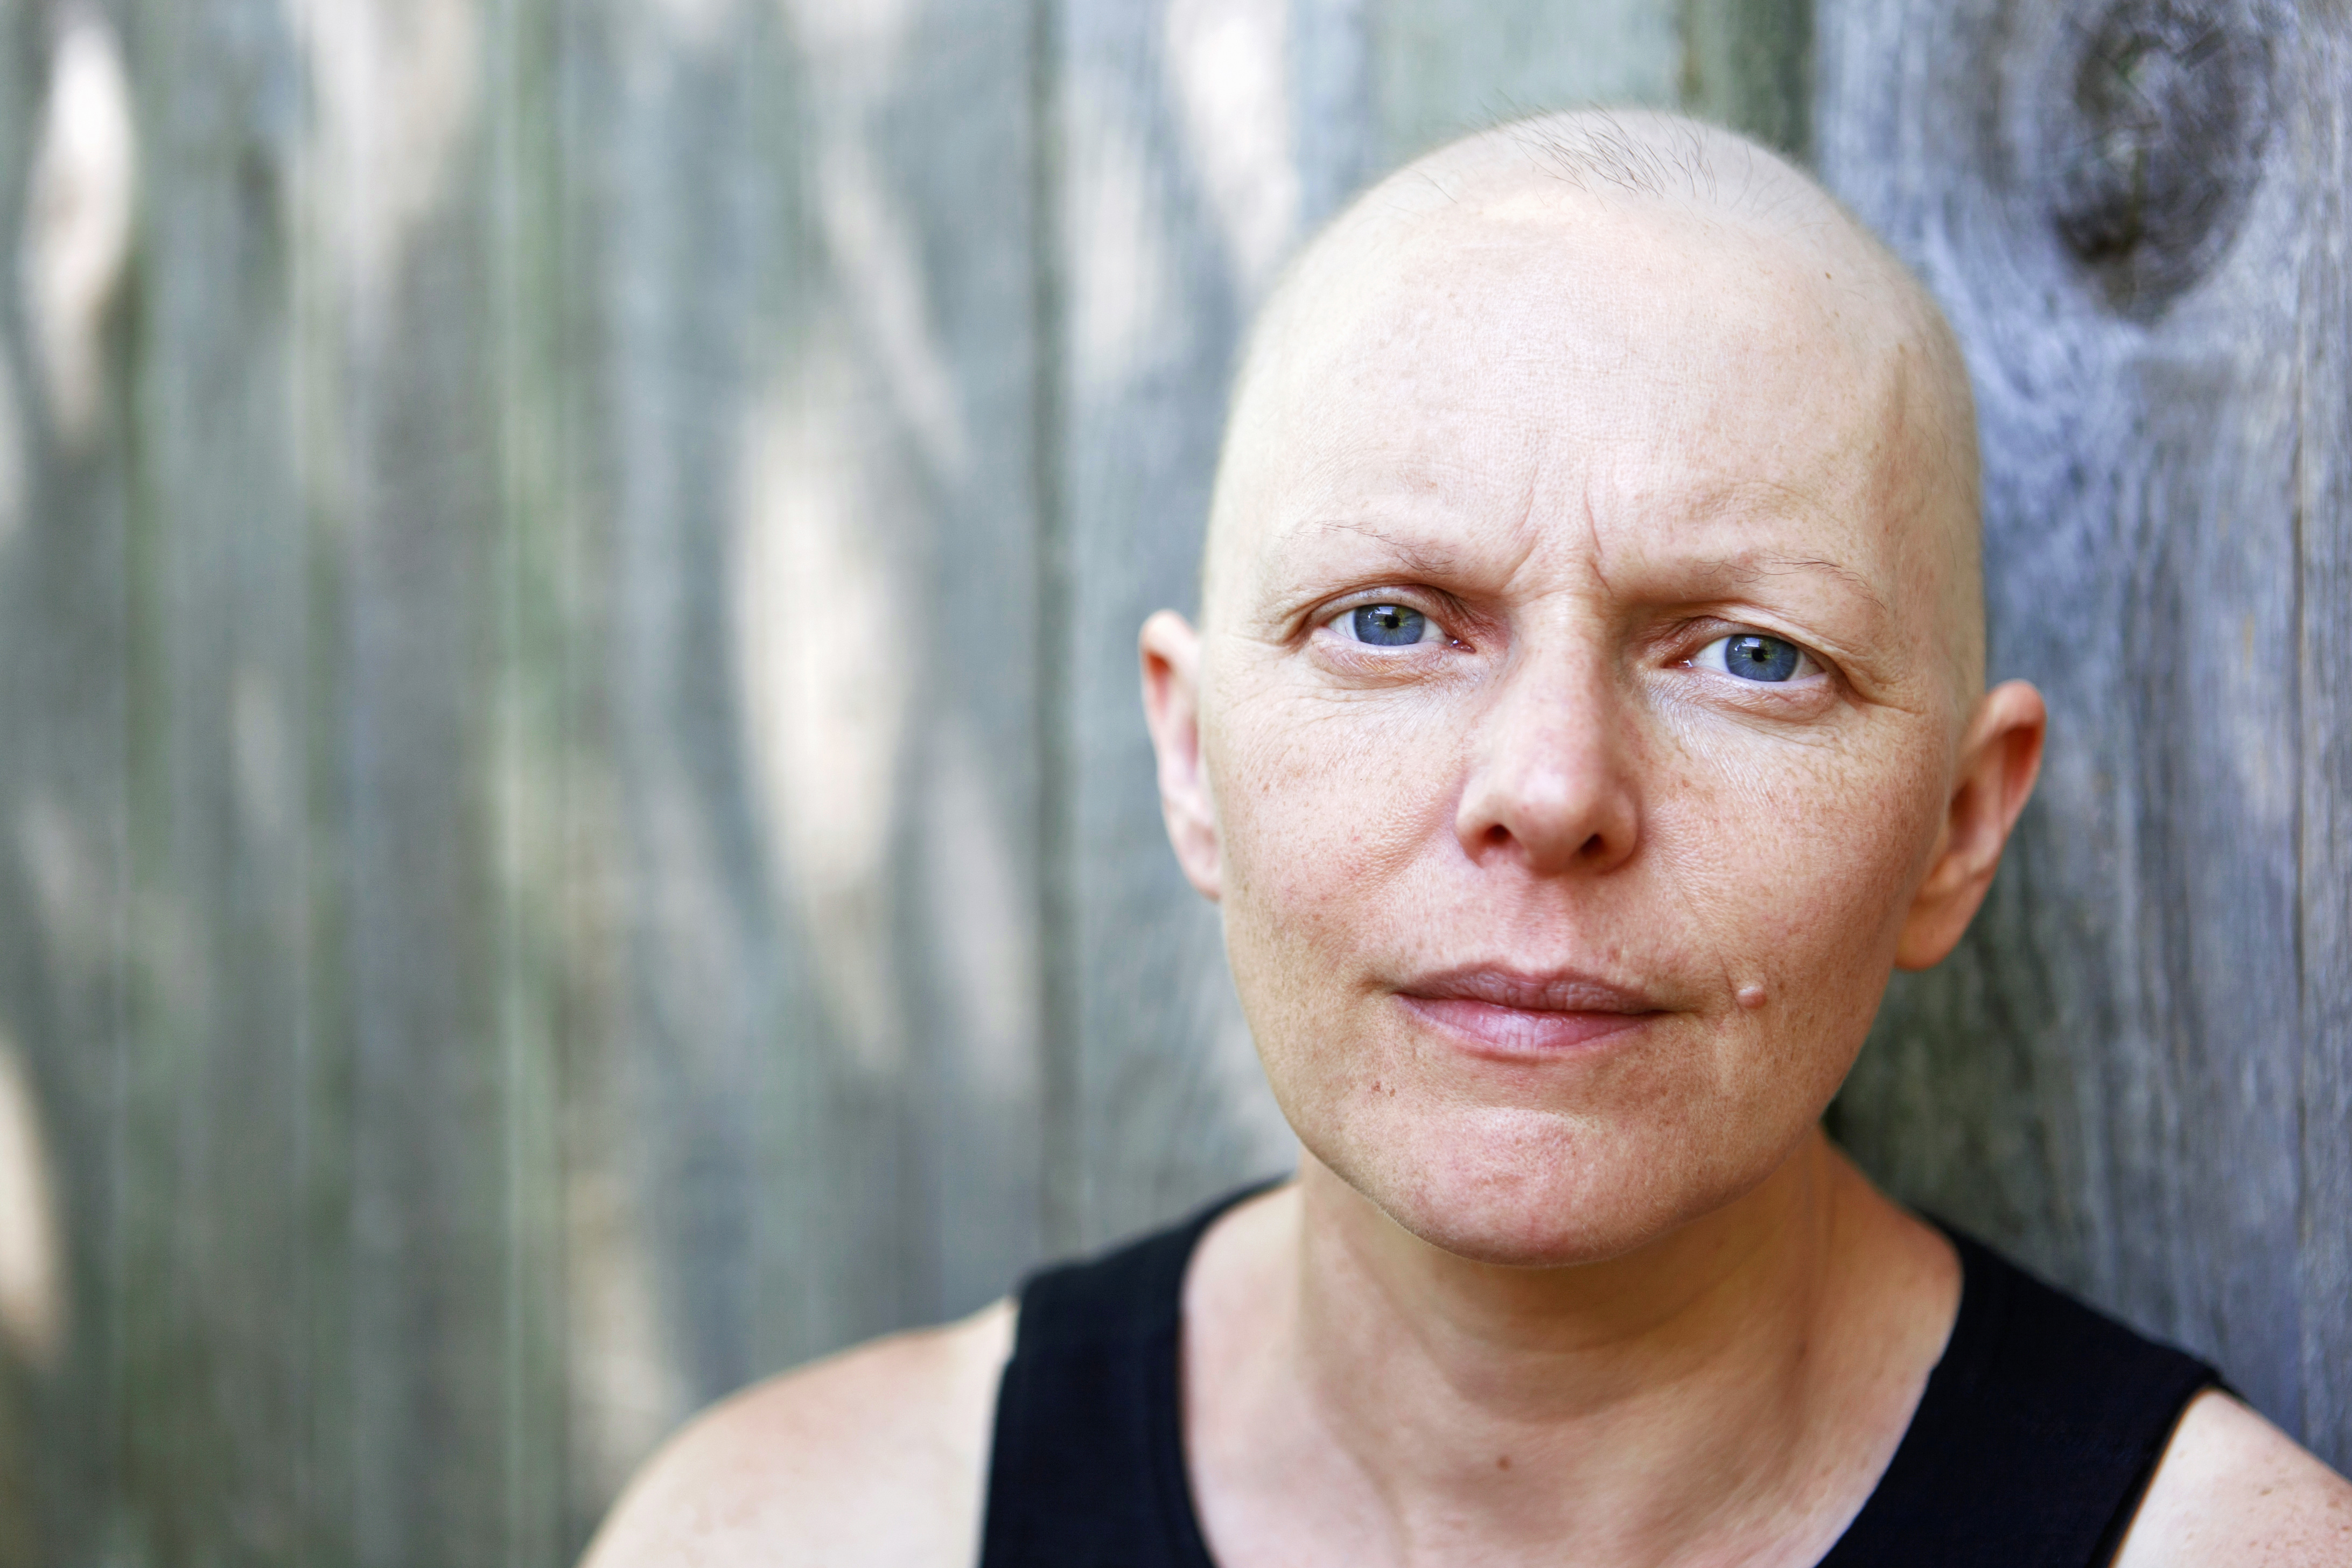 bald cancer patient from taxotere